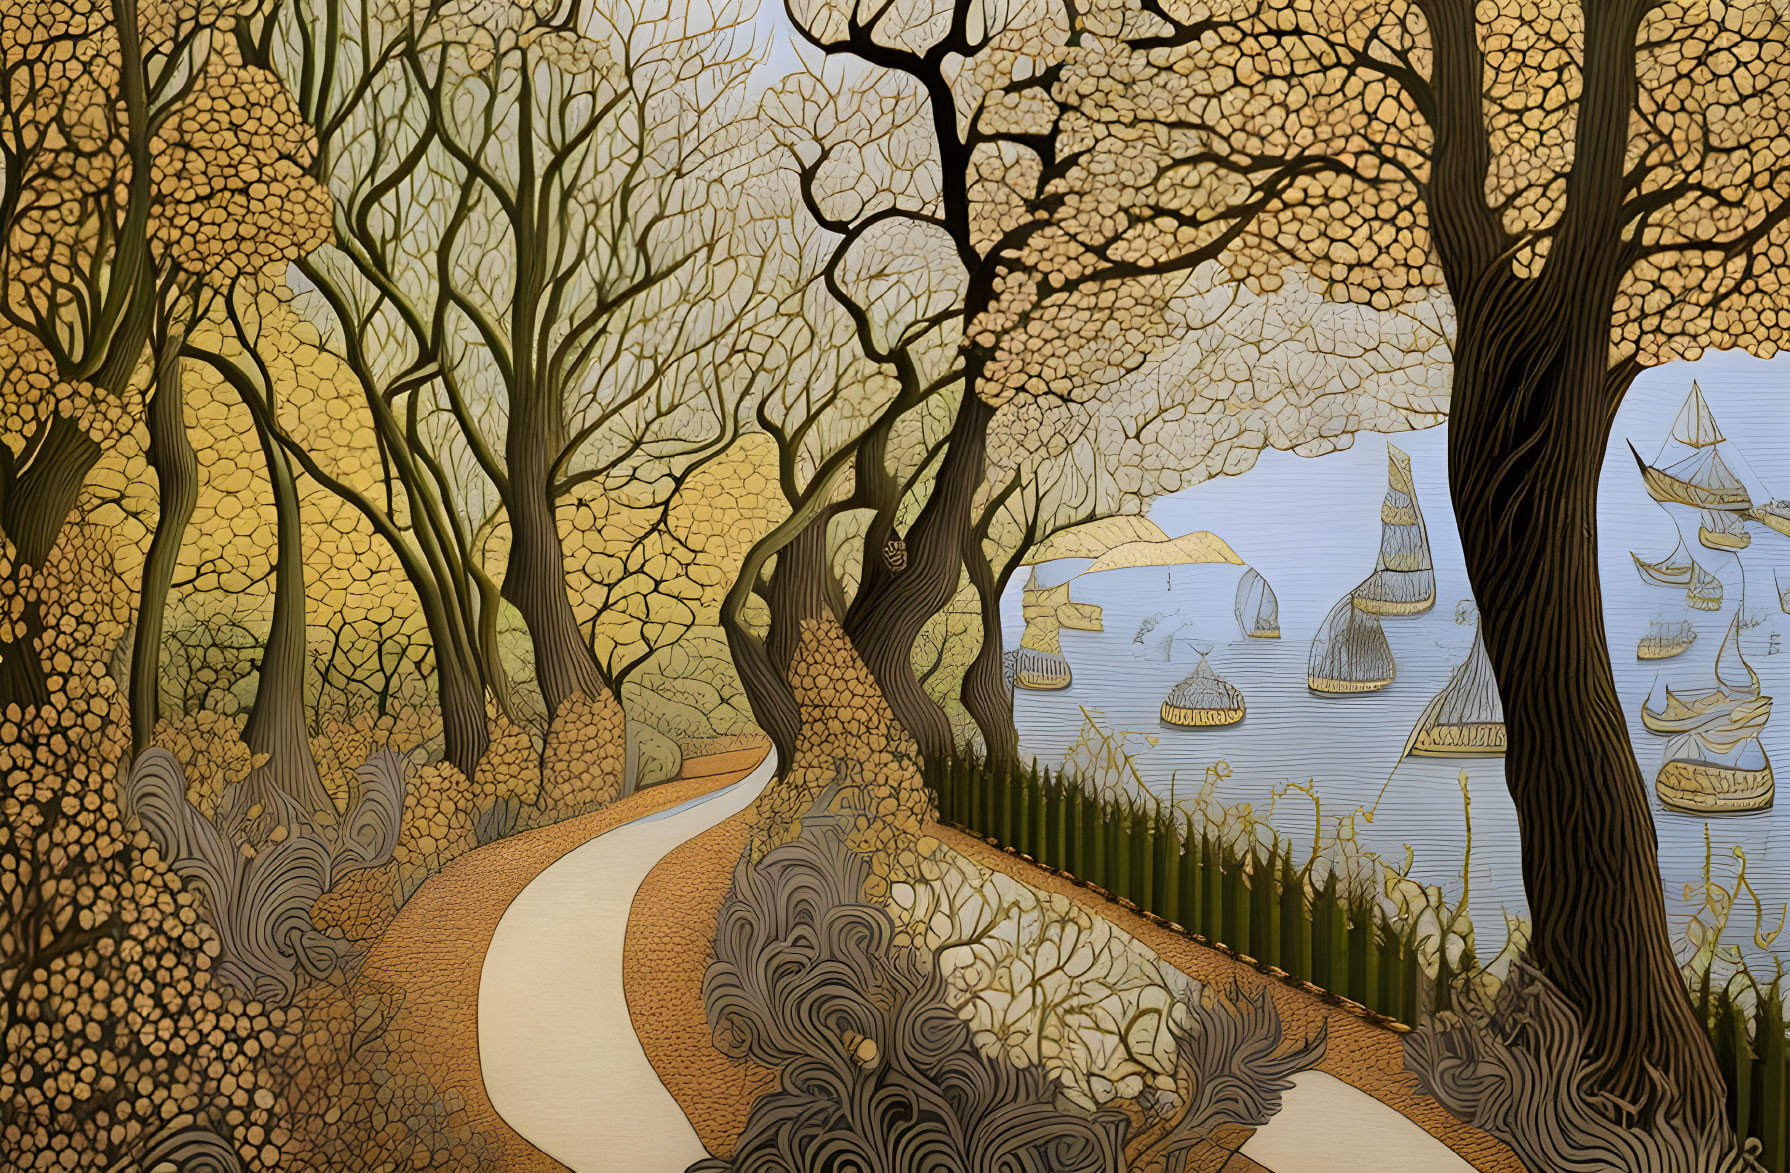 Stylized autumn landscape with winding path, golden trees, serene lake, sailboats, textured sky